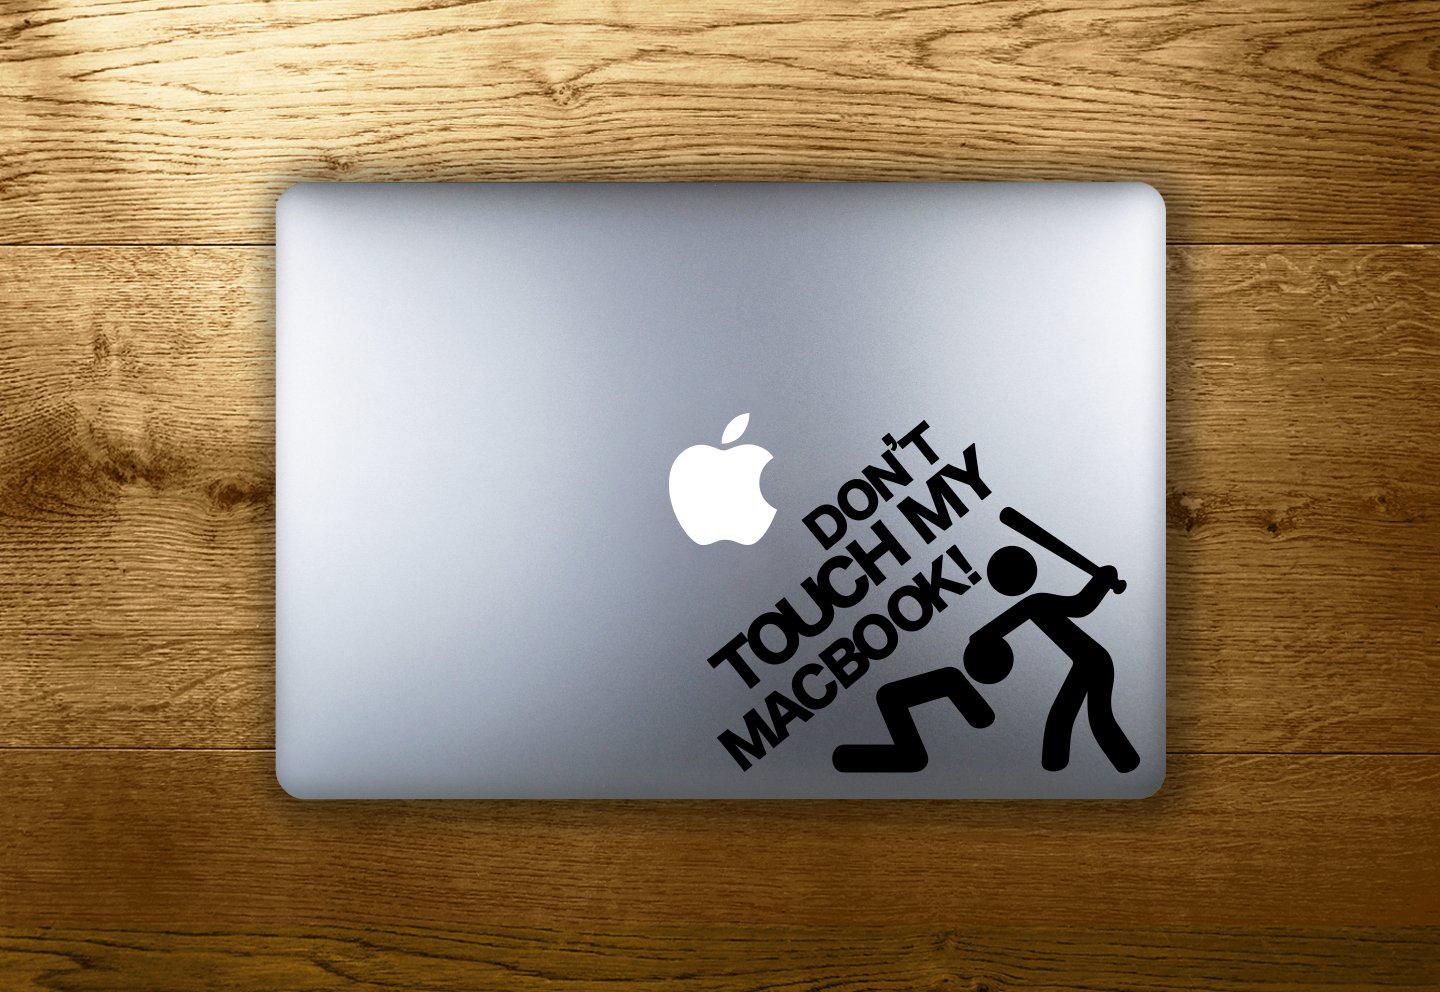 Don't touch my MacBook! - make it stick